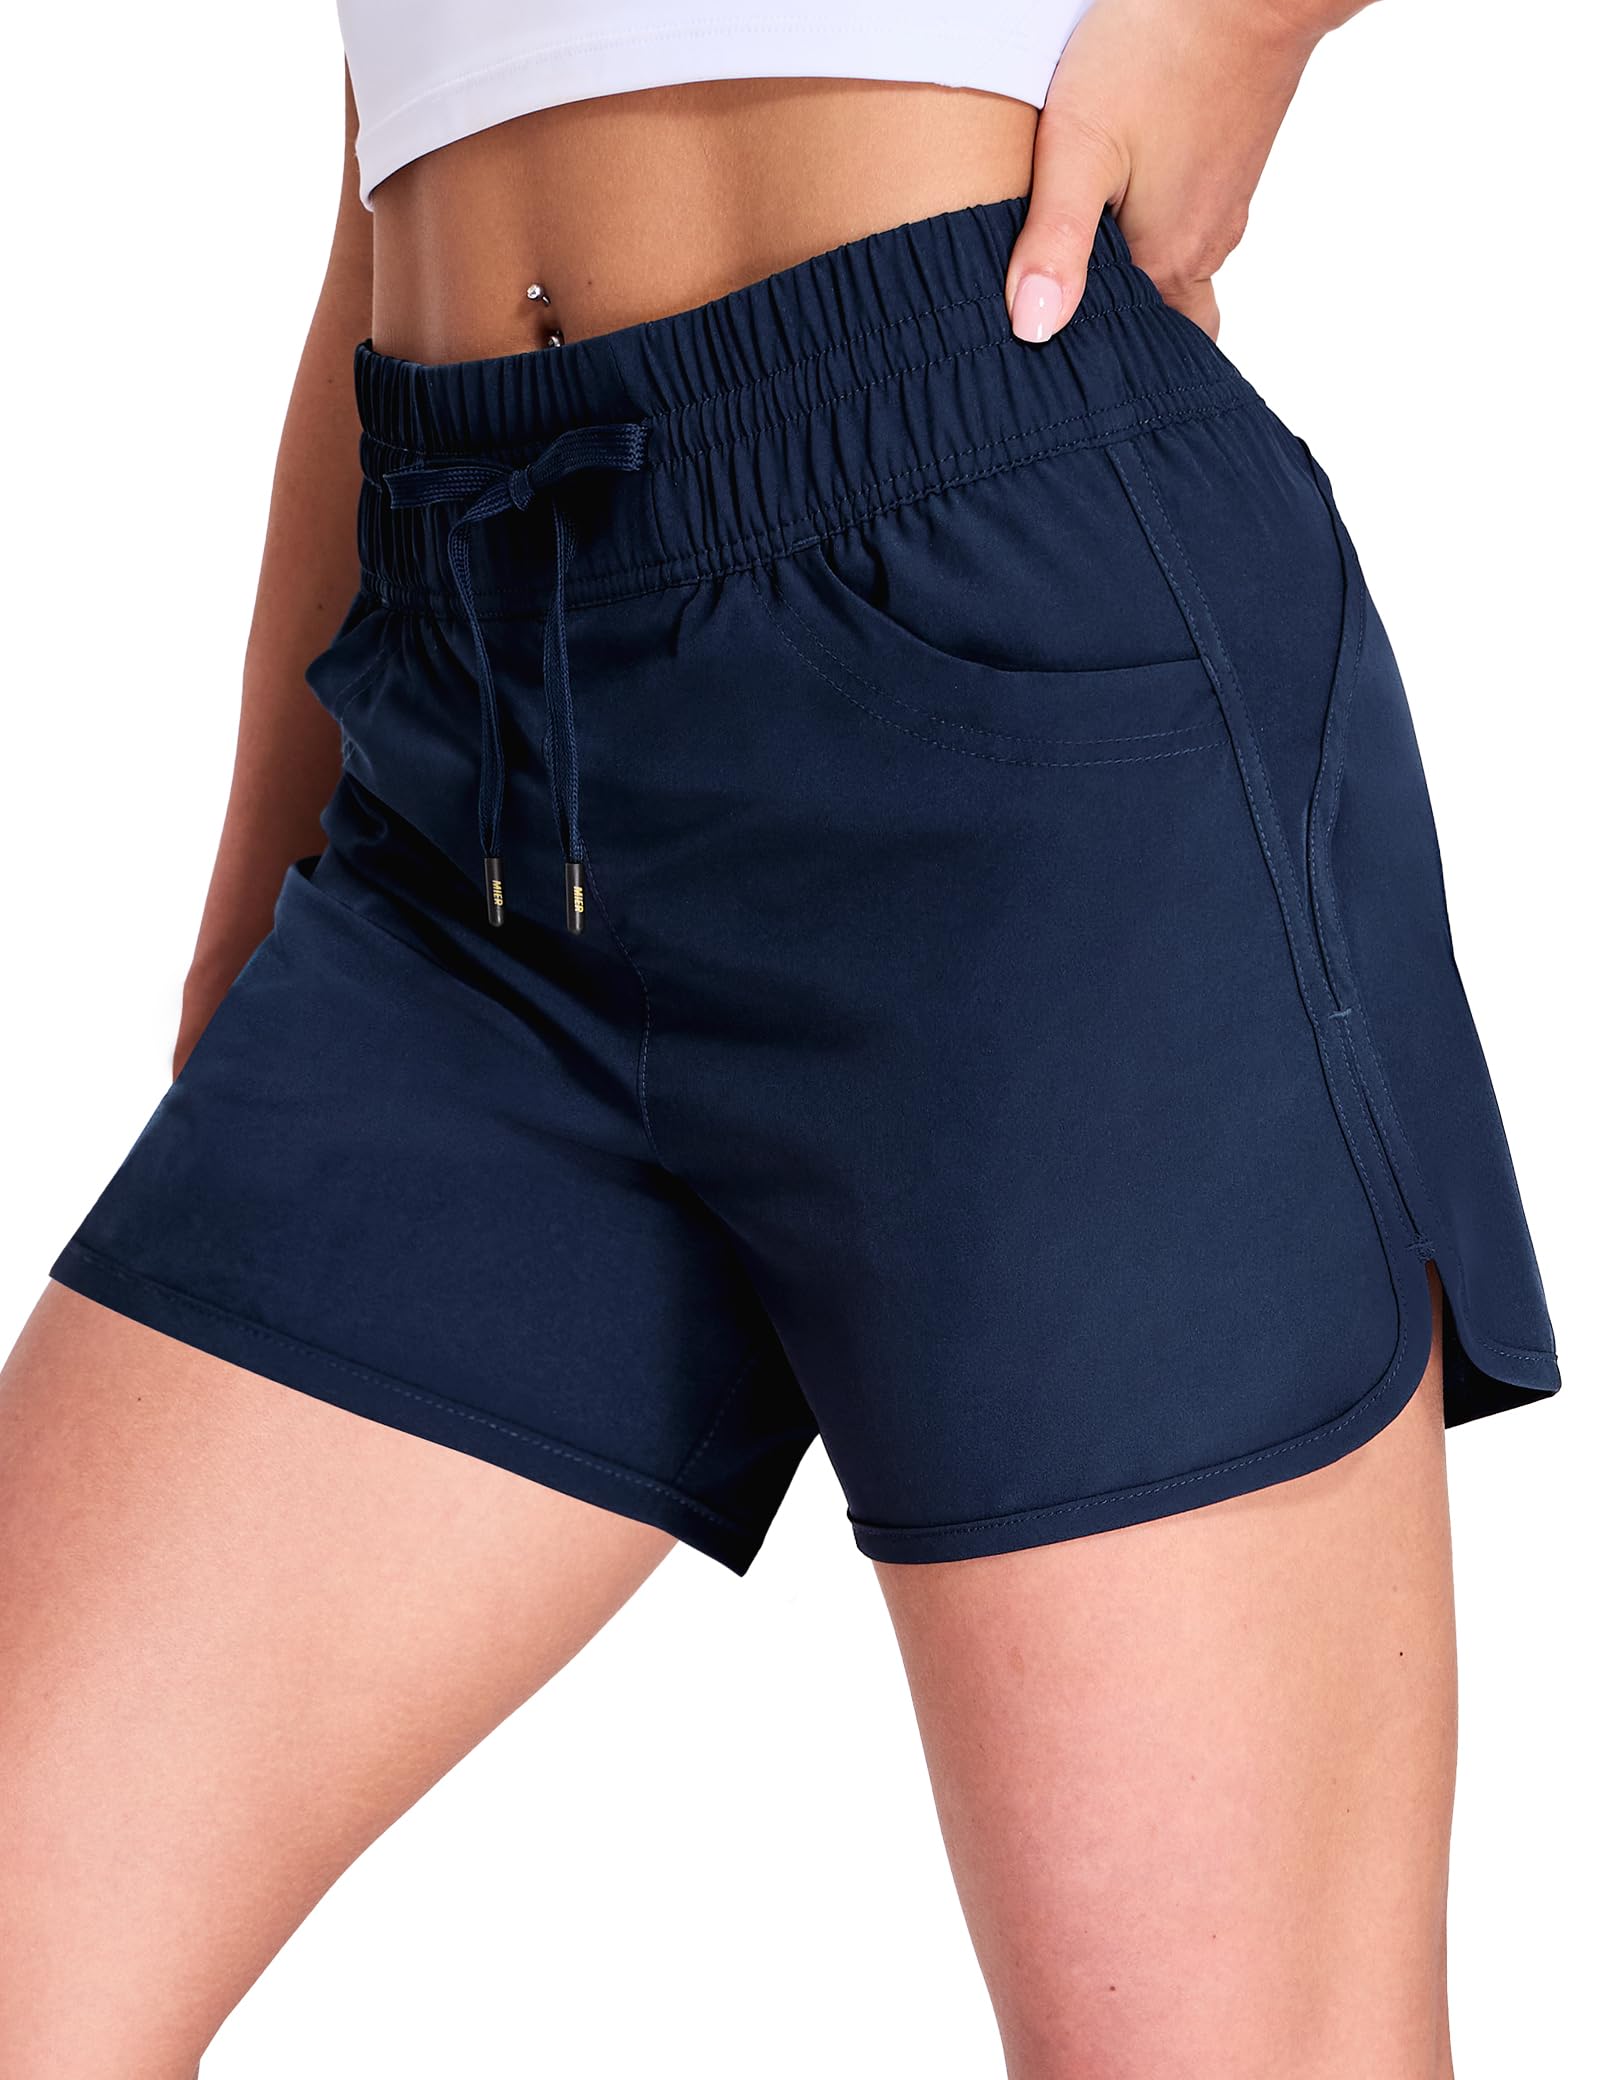 Women's Running Shorts Quick Dry with Liner Zipper Pocket